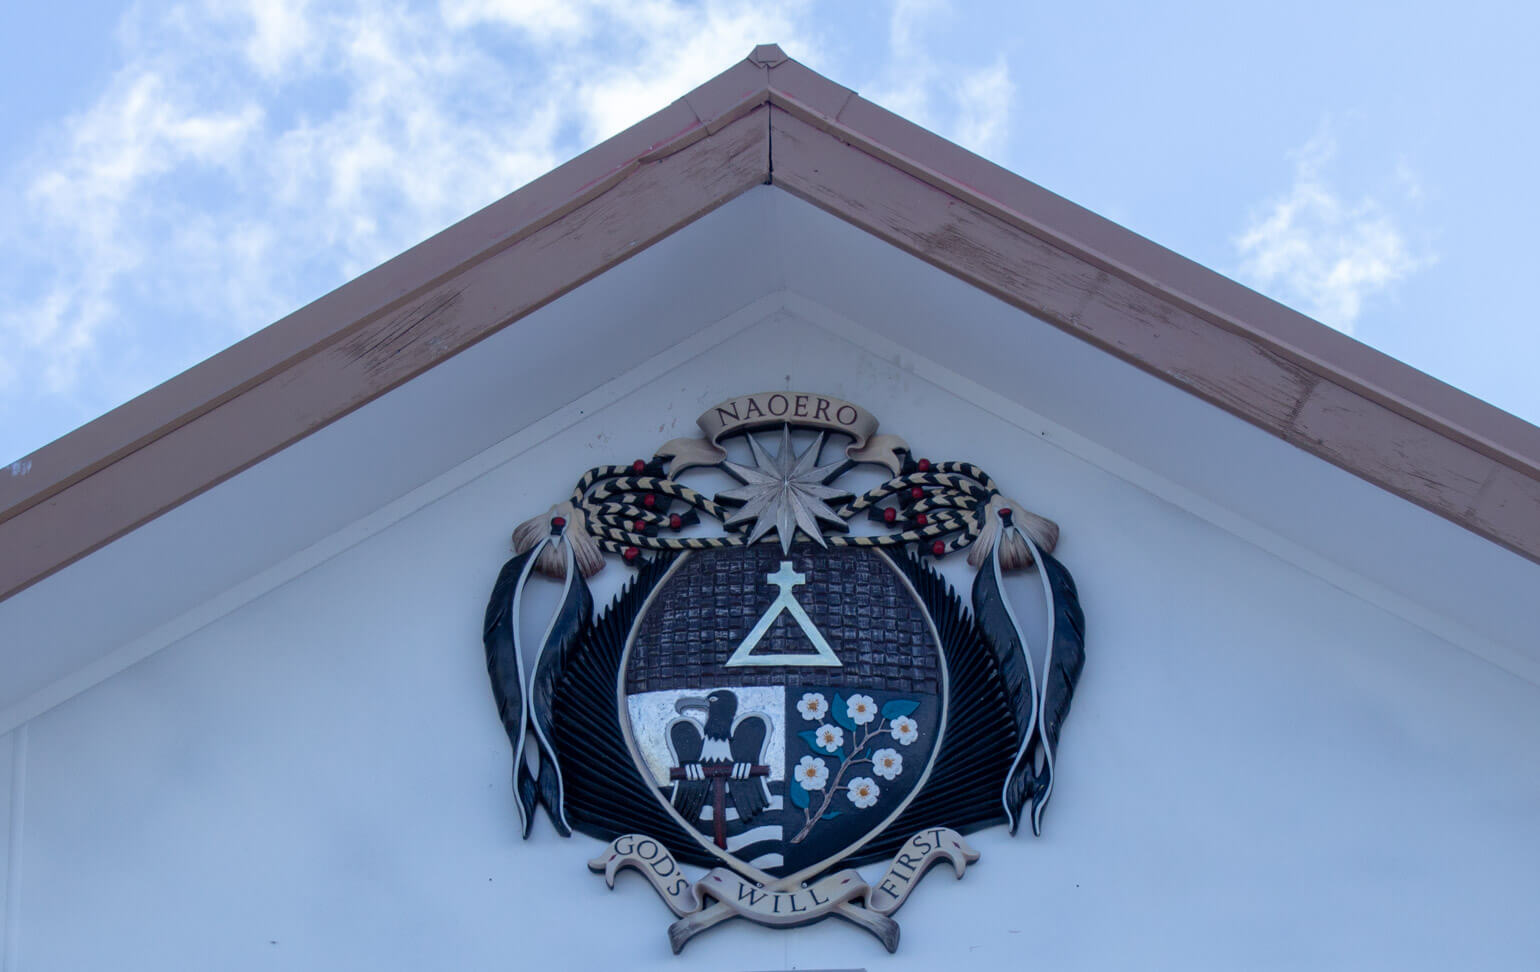 Coat of arms on the Nauru parliament building.